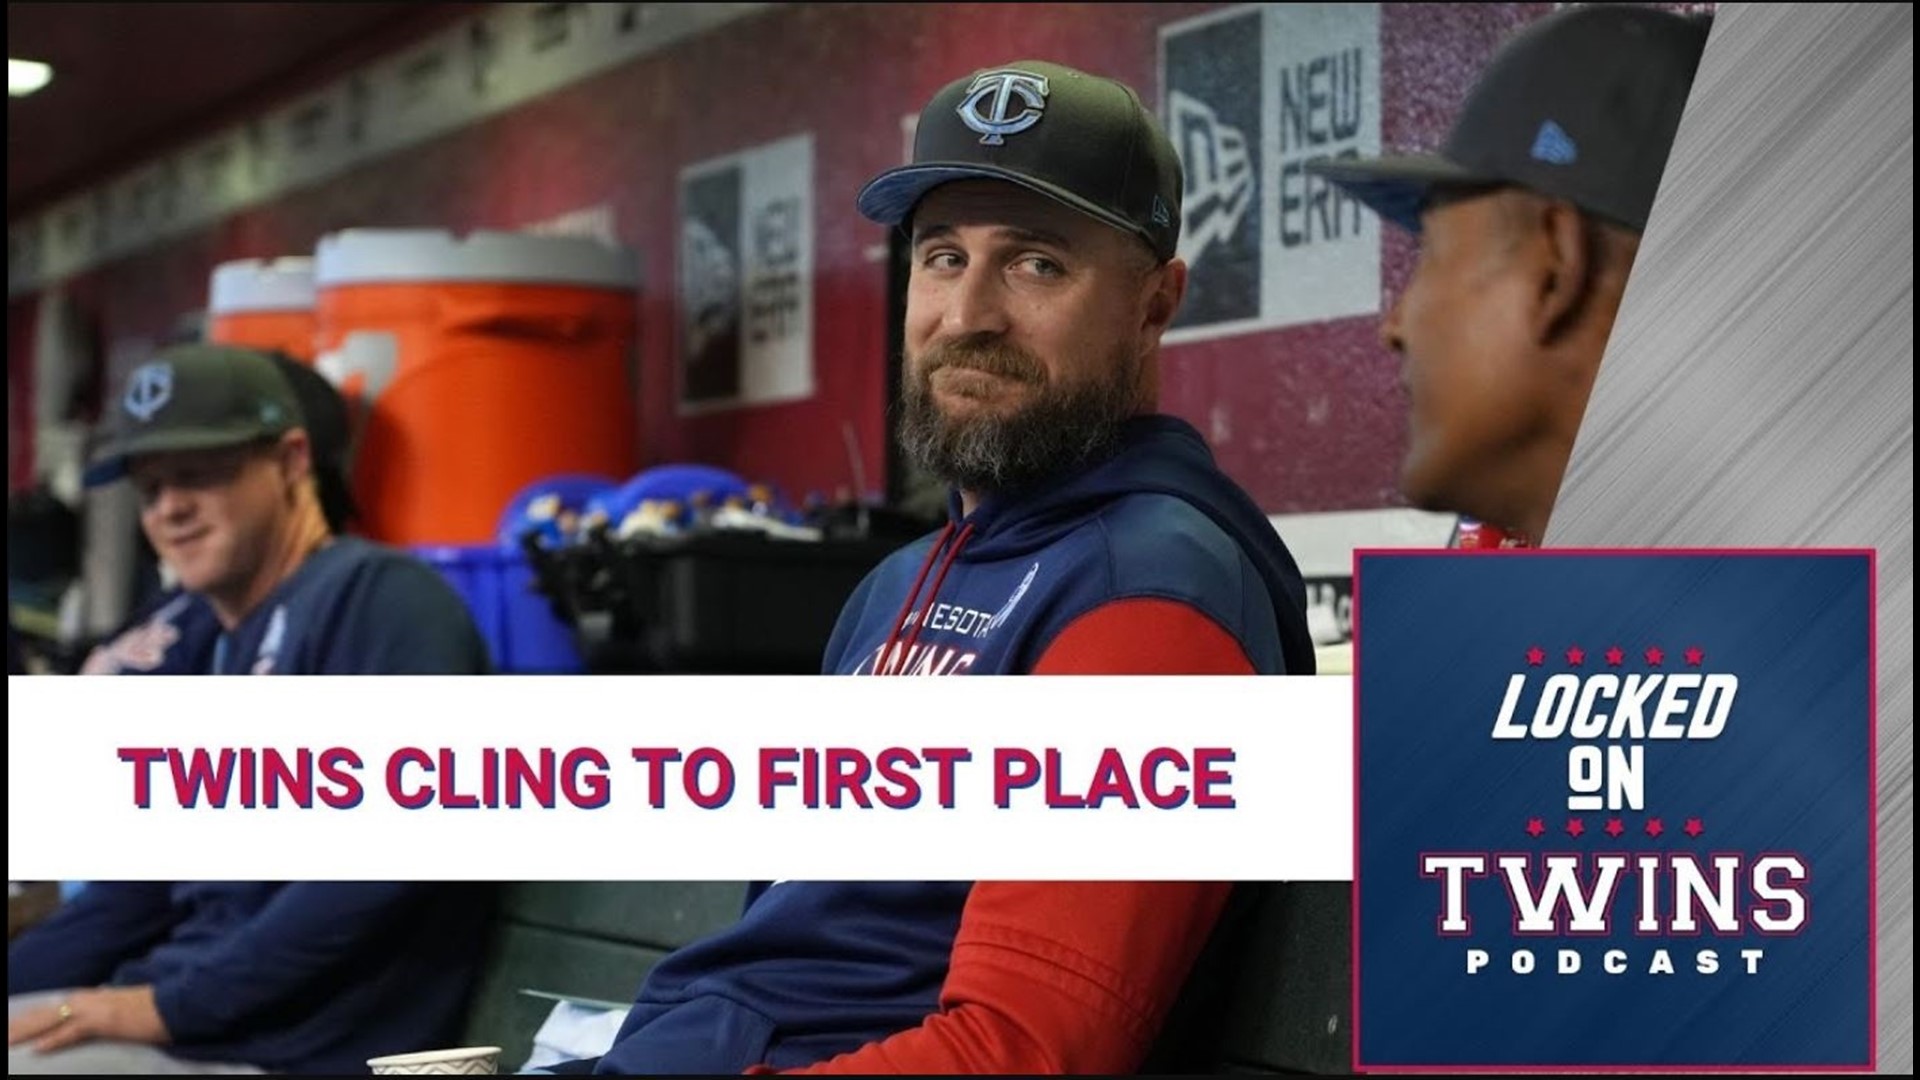 The Twins went 3-3 on their trip West, winning the series over the Mariners and dropping 2 out of 3 to the Diamondbacks. Now they head back to take on the Guardians.